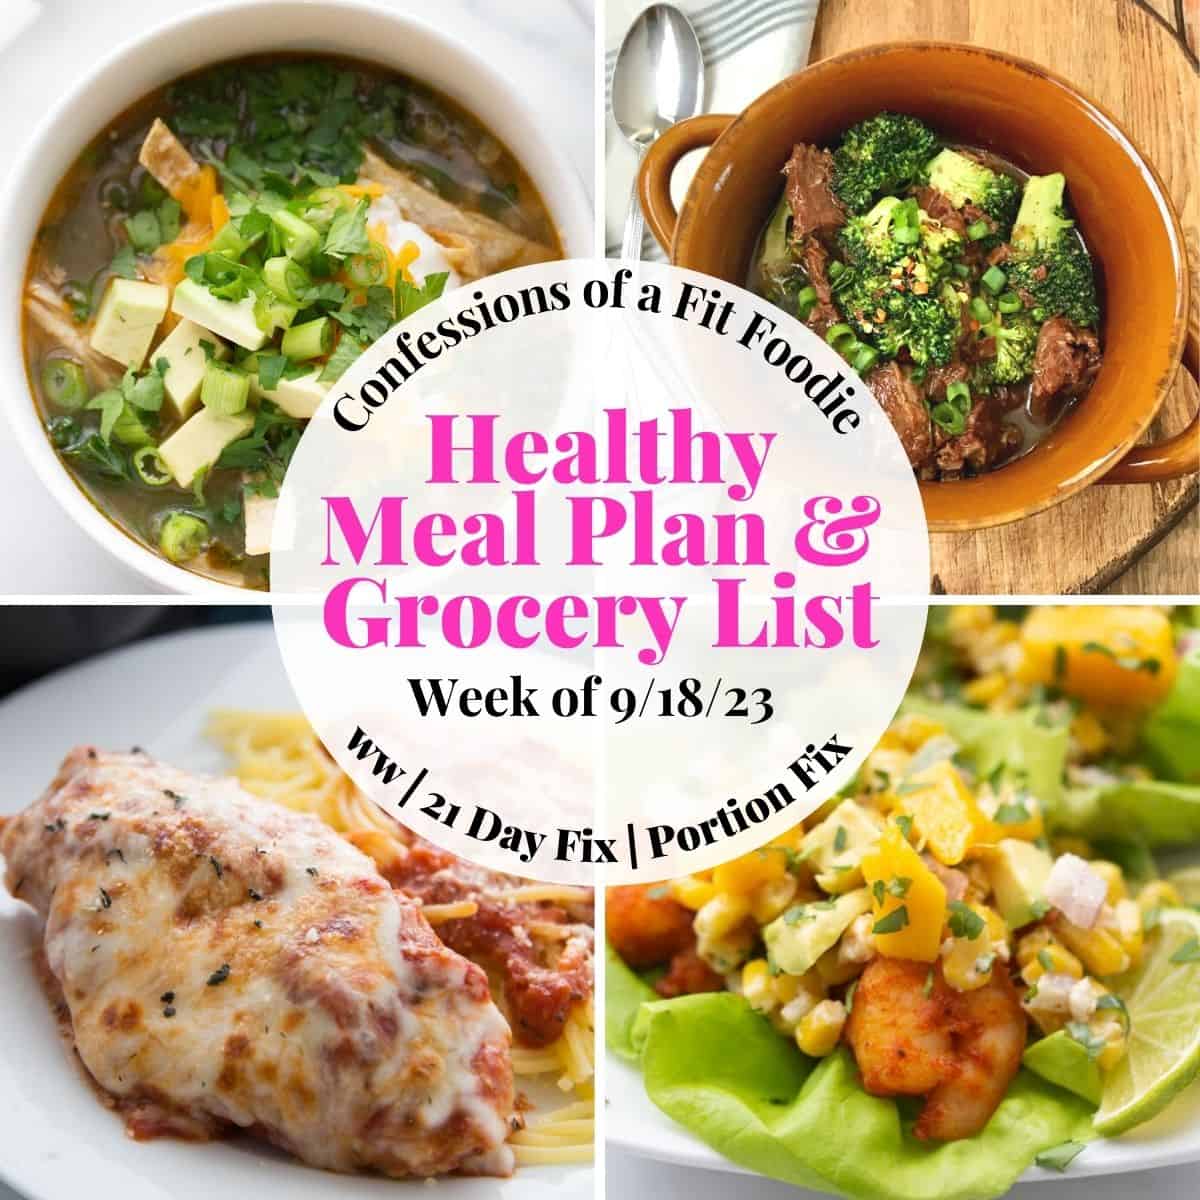 Food photo collage with pink and black text on a white circle. Text says, "Healthy Meal Plan & Grocery List 9/18/23"